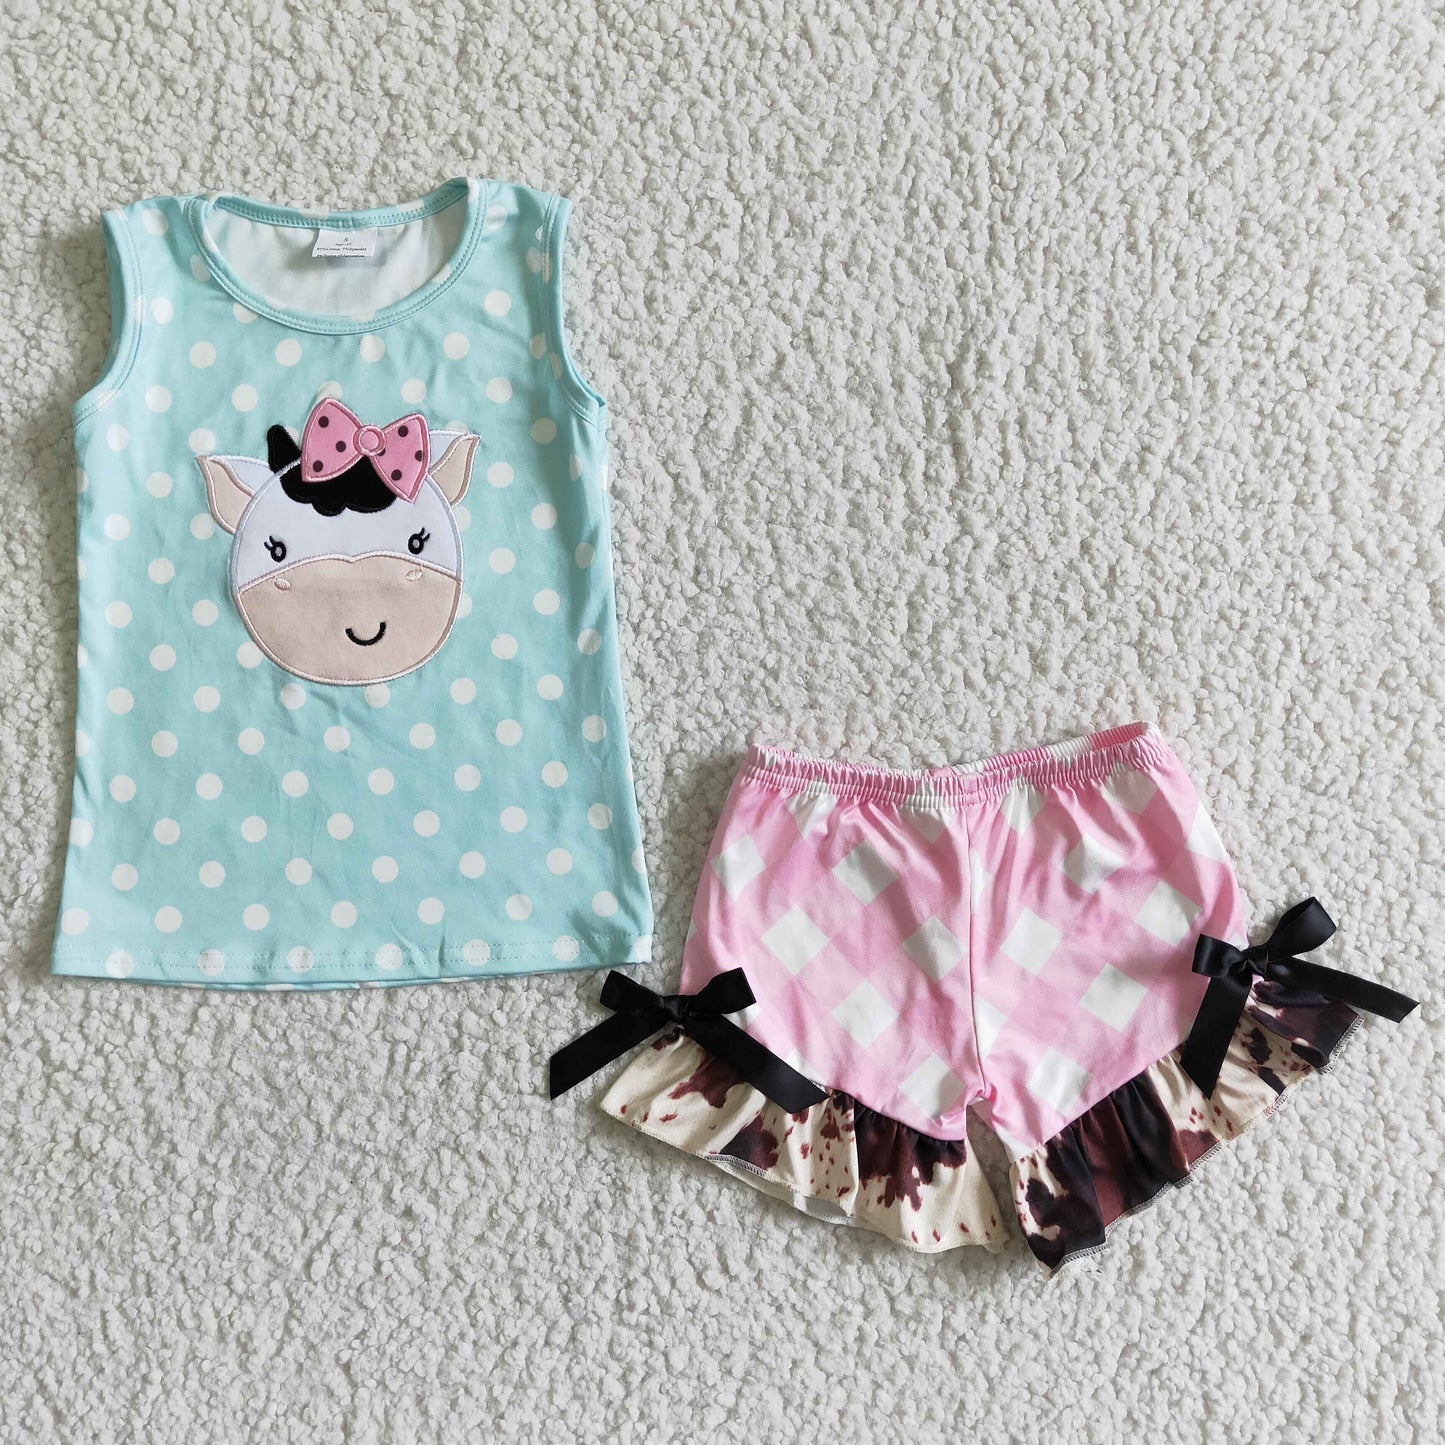 girl cute milk cow embroidery tank top match ruffle shorts outfit